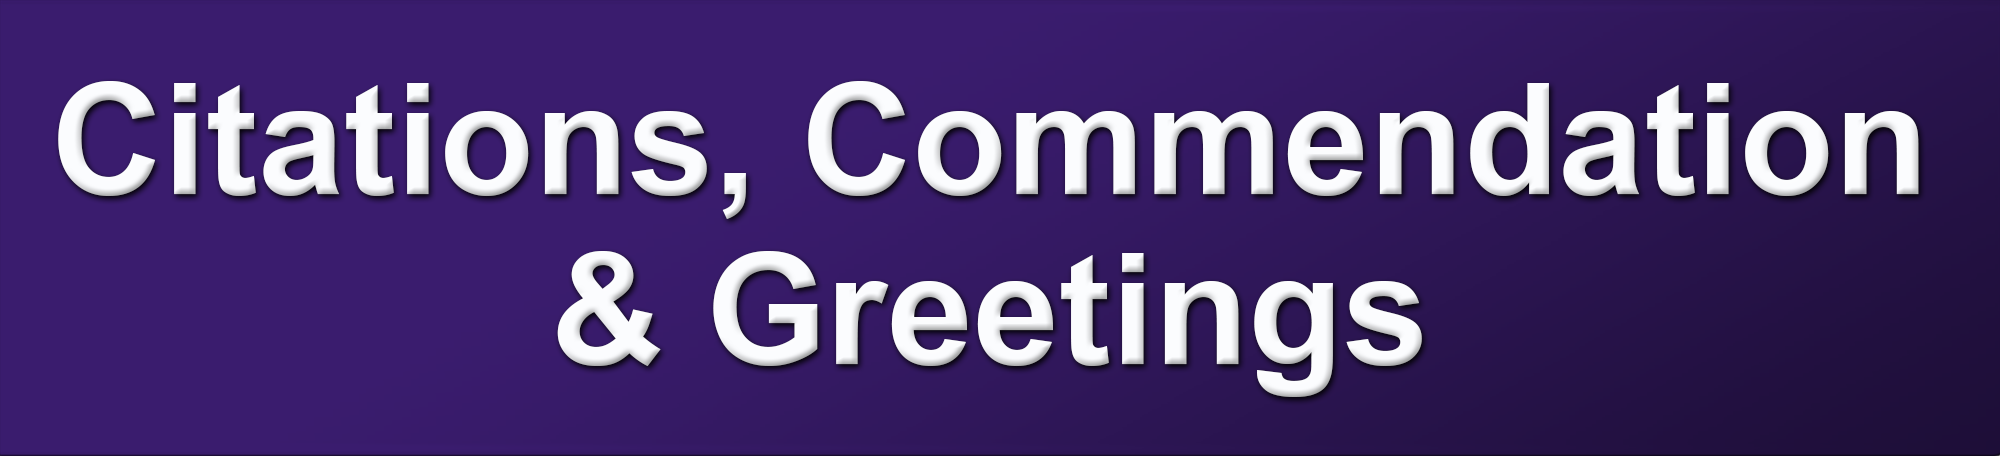 Citations, Commendation & Greetings